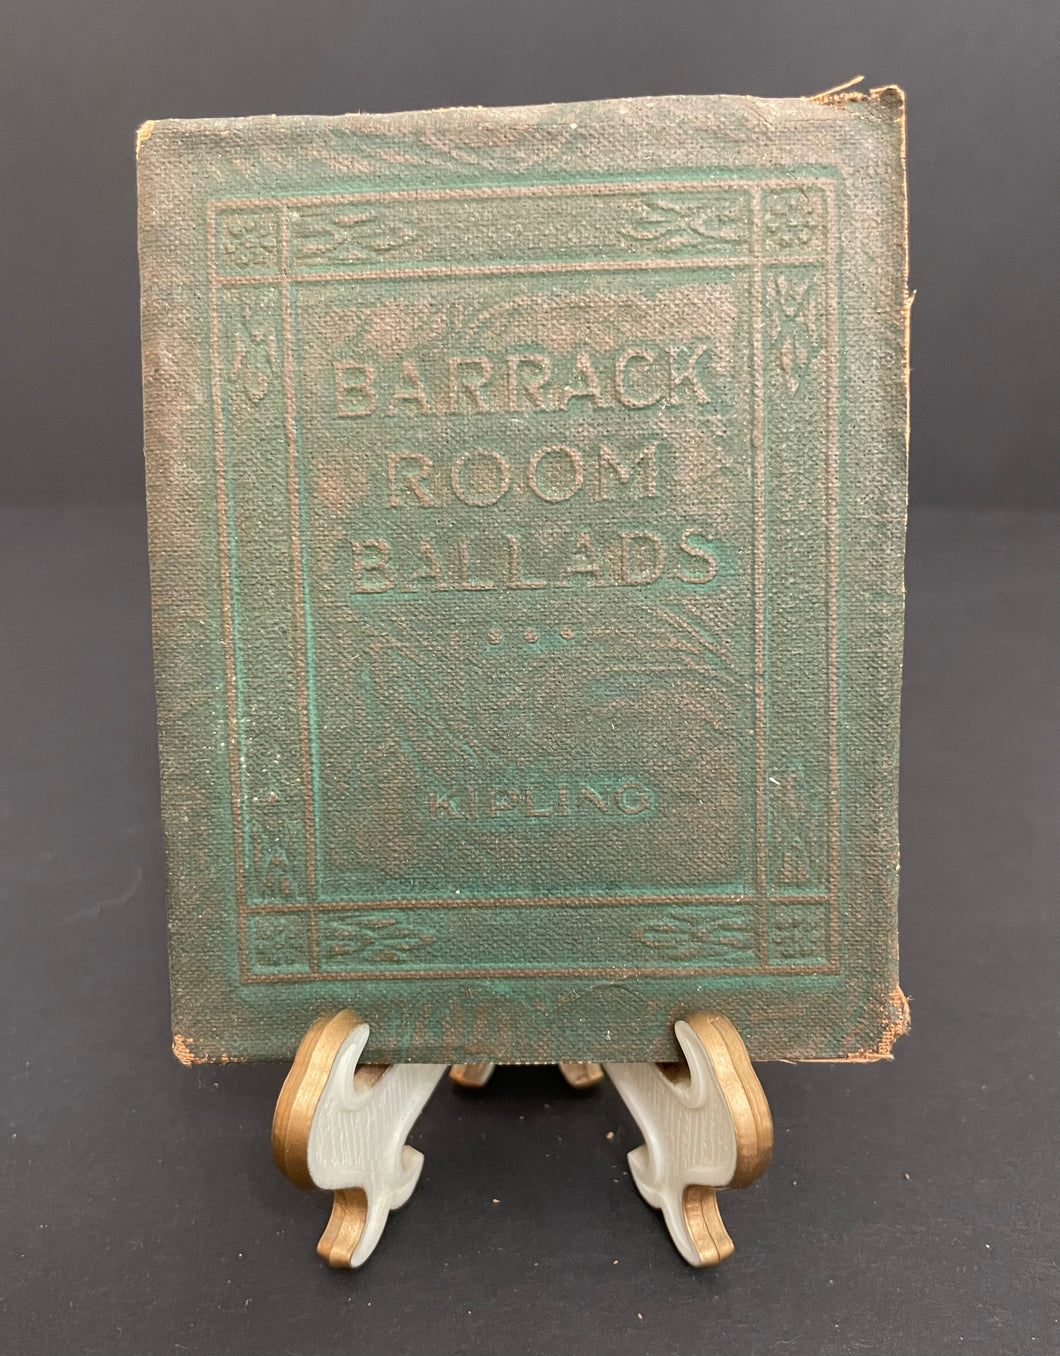 Antique Little Leather Library “Barrack Room Ballads” by Kipling